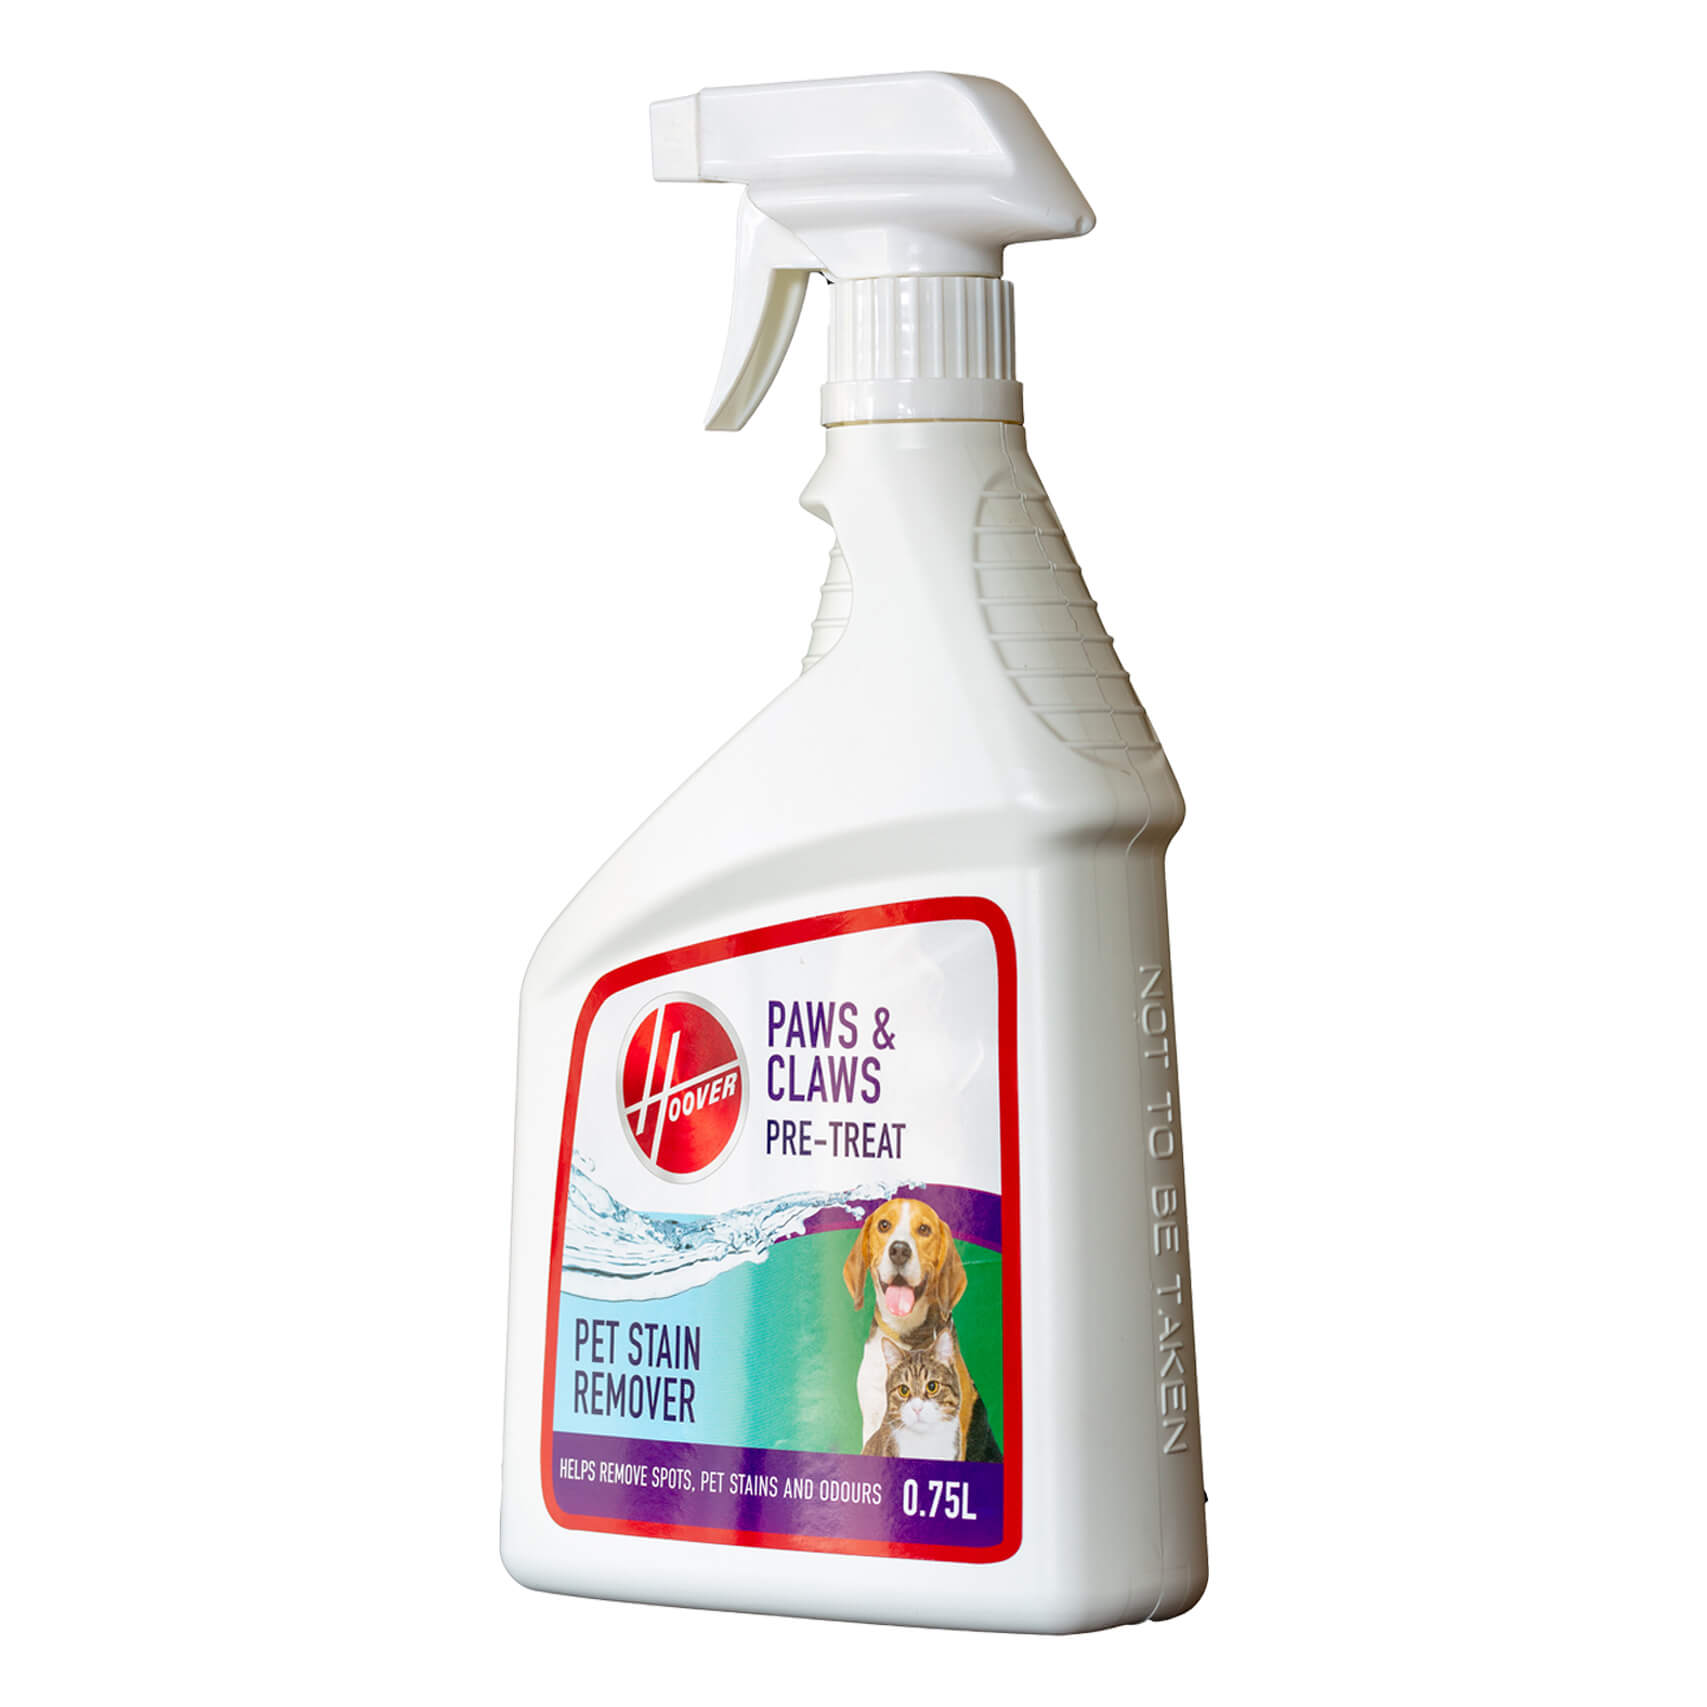 Hoover Paws & Claws Pre-Treat Pet Stain Remover. 750ml Bottle